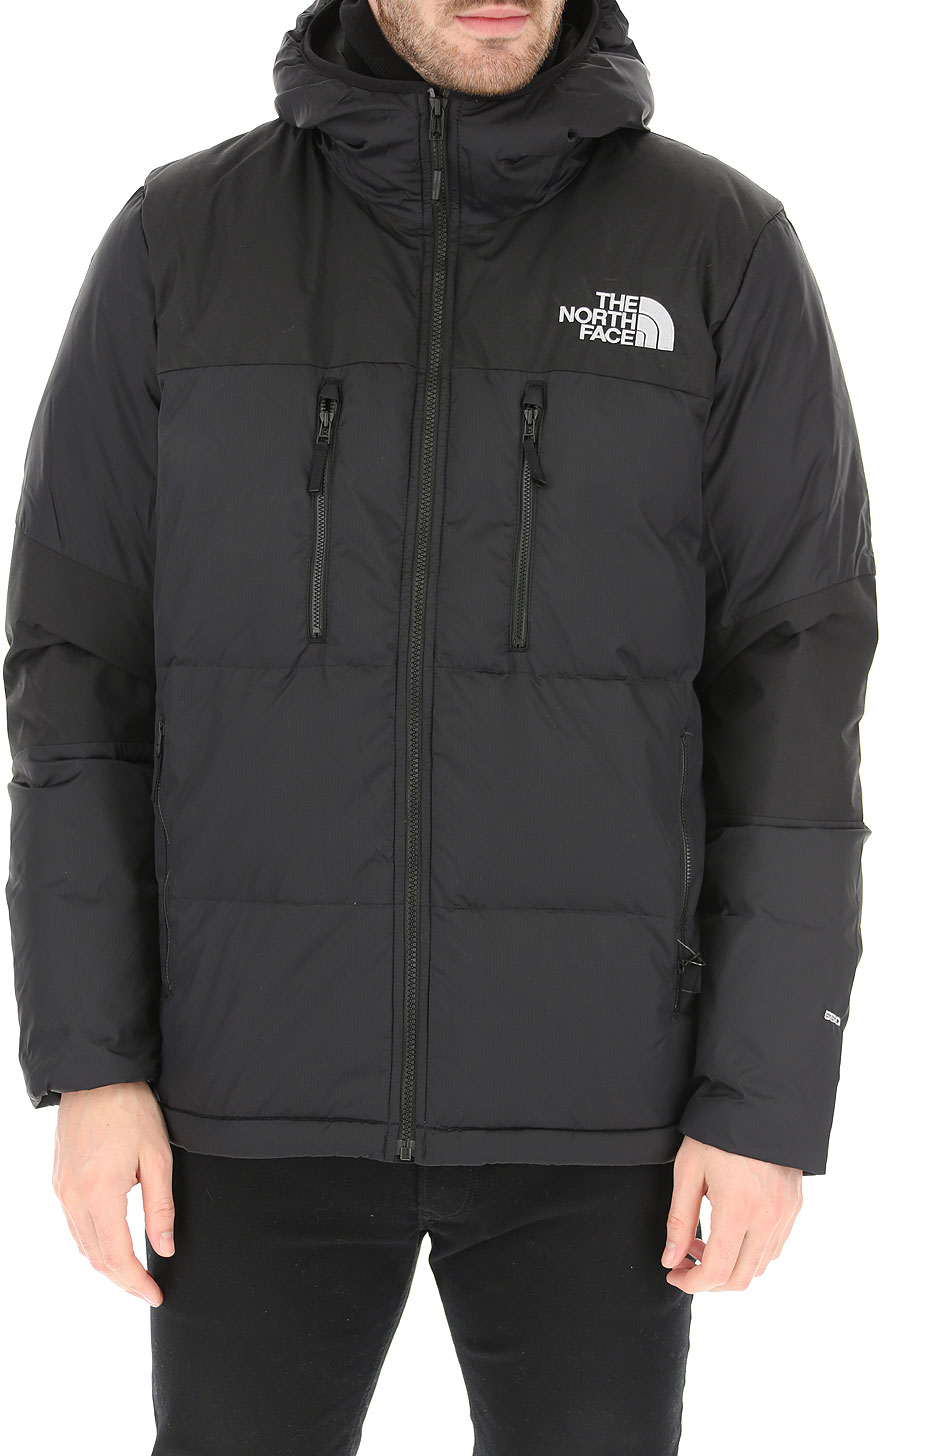 Mens Clothing The North Face, Style code: t930edjk3-E200-